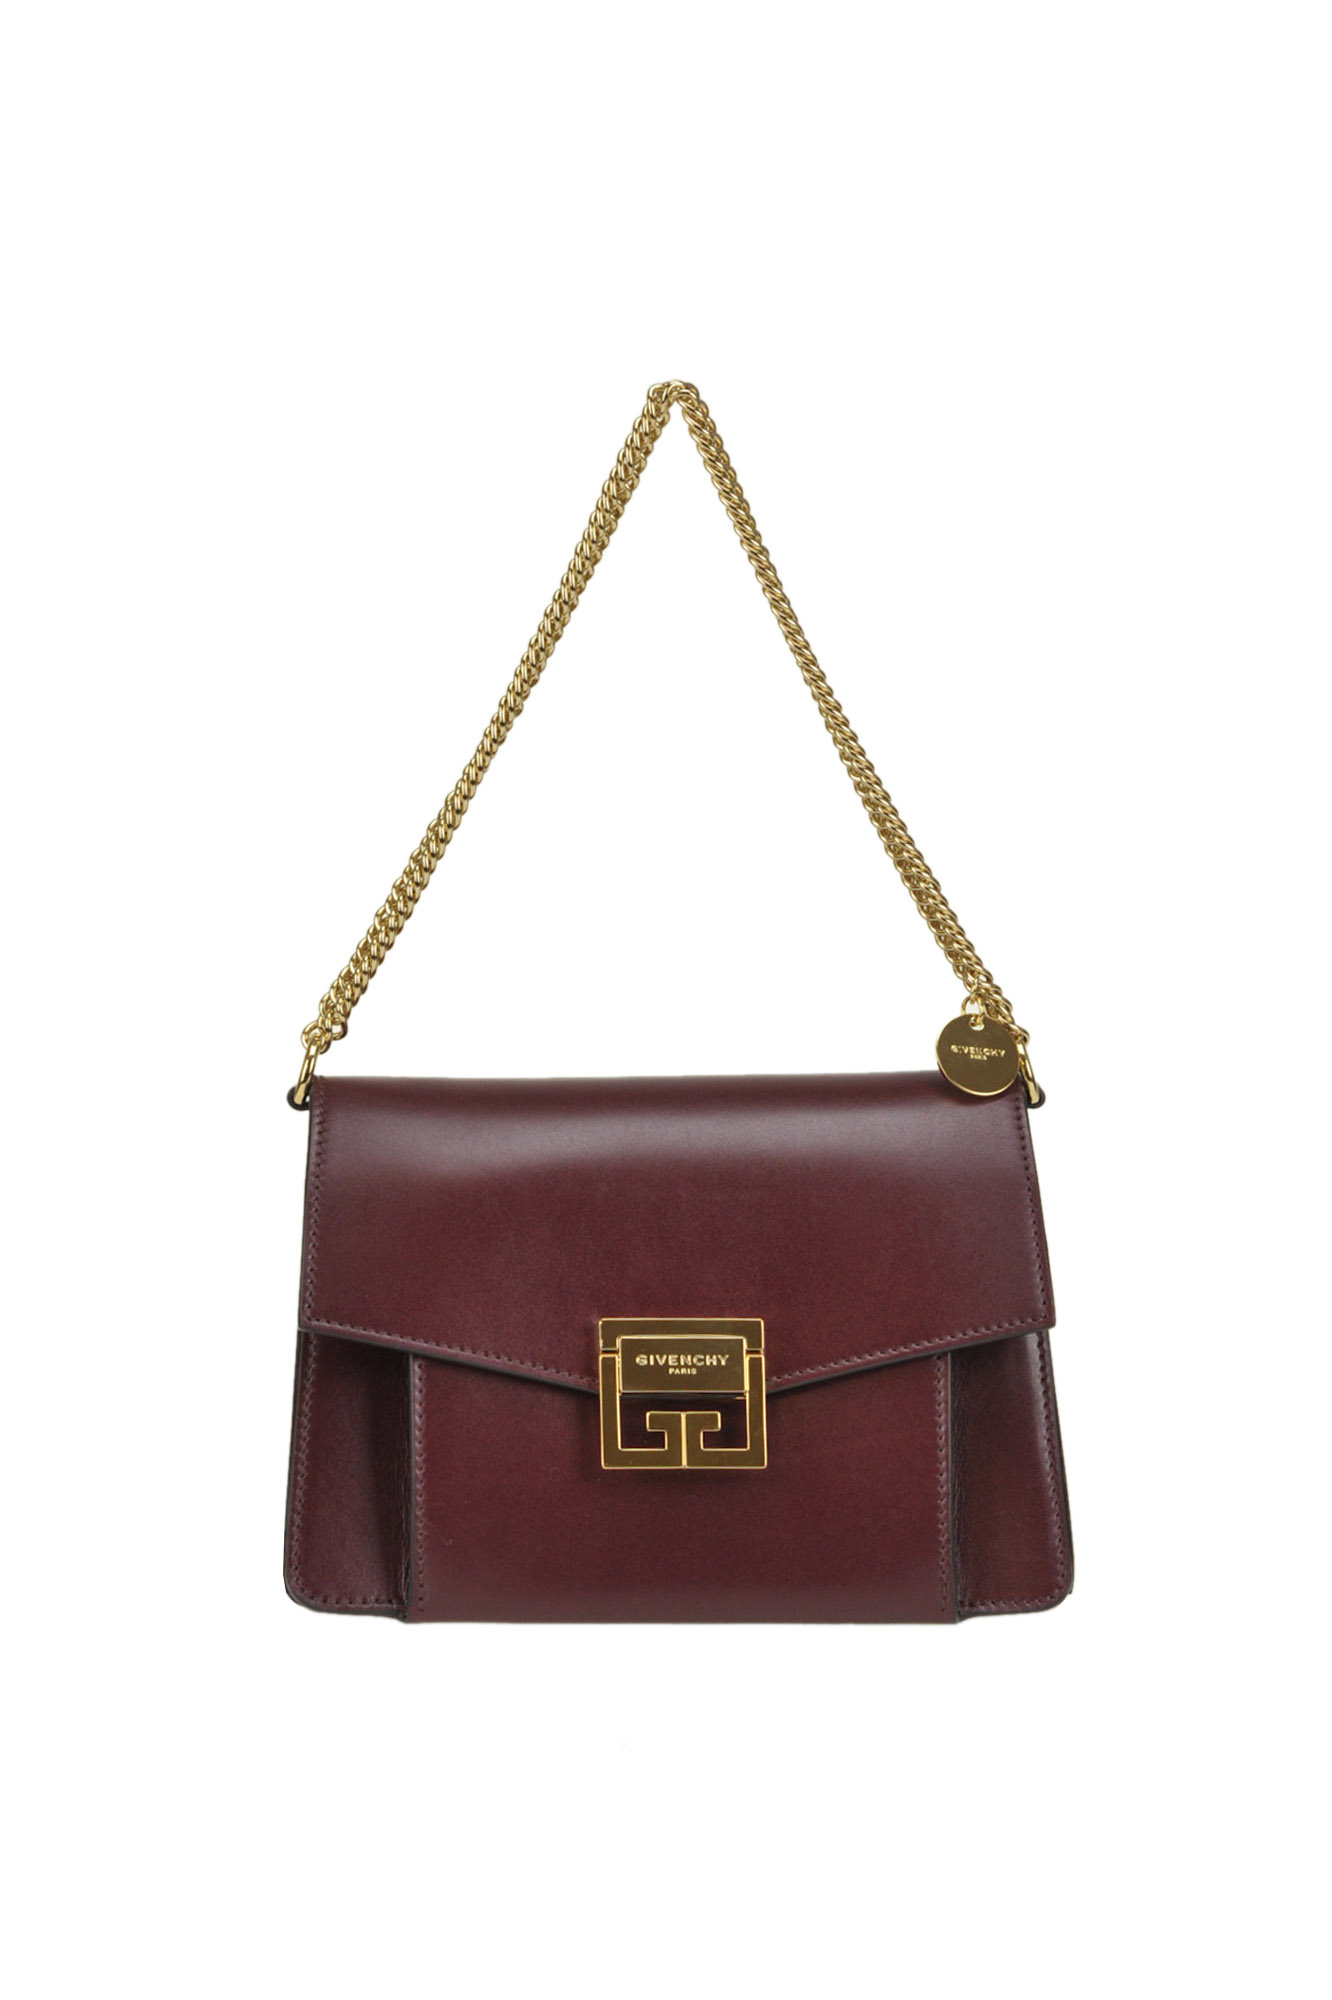 Givenchy Gv3 Small Leather Shoulder Bag In Bordeaux